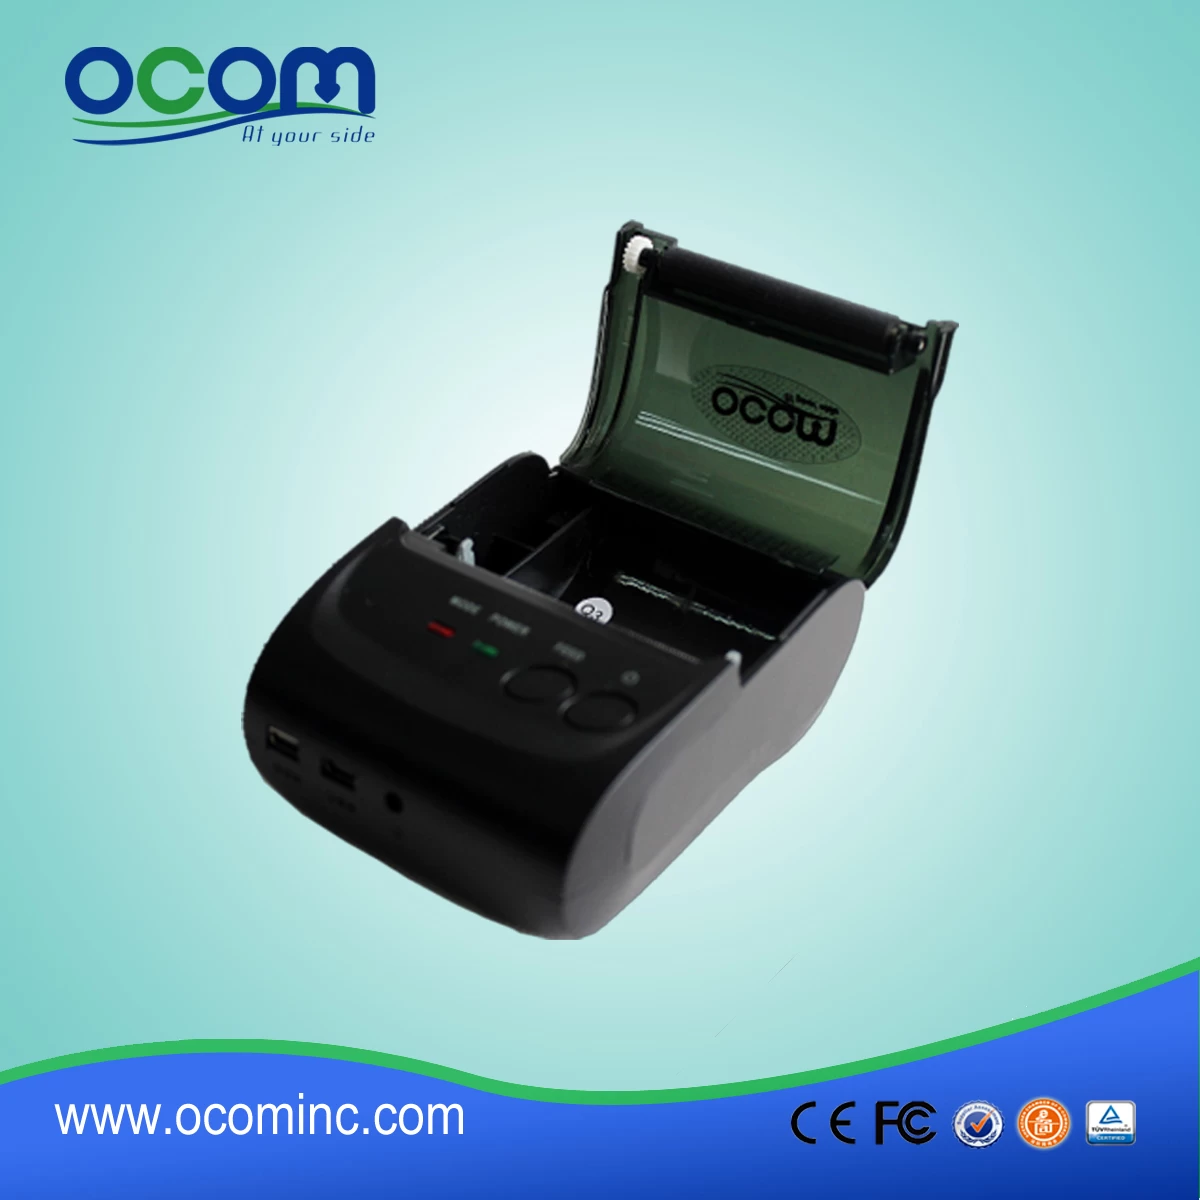 OCPP-M05: portable thermal printer price, android thermal printer pos printer